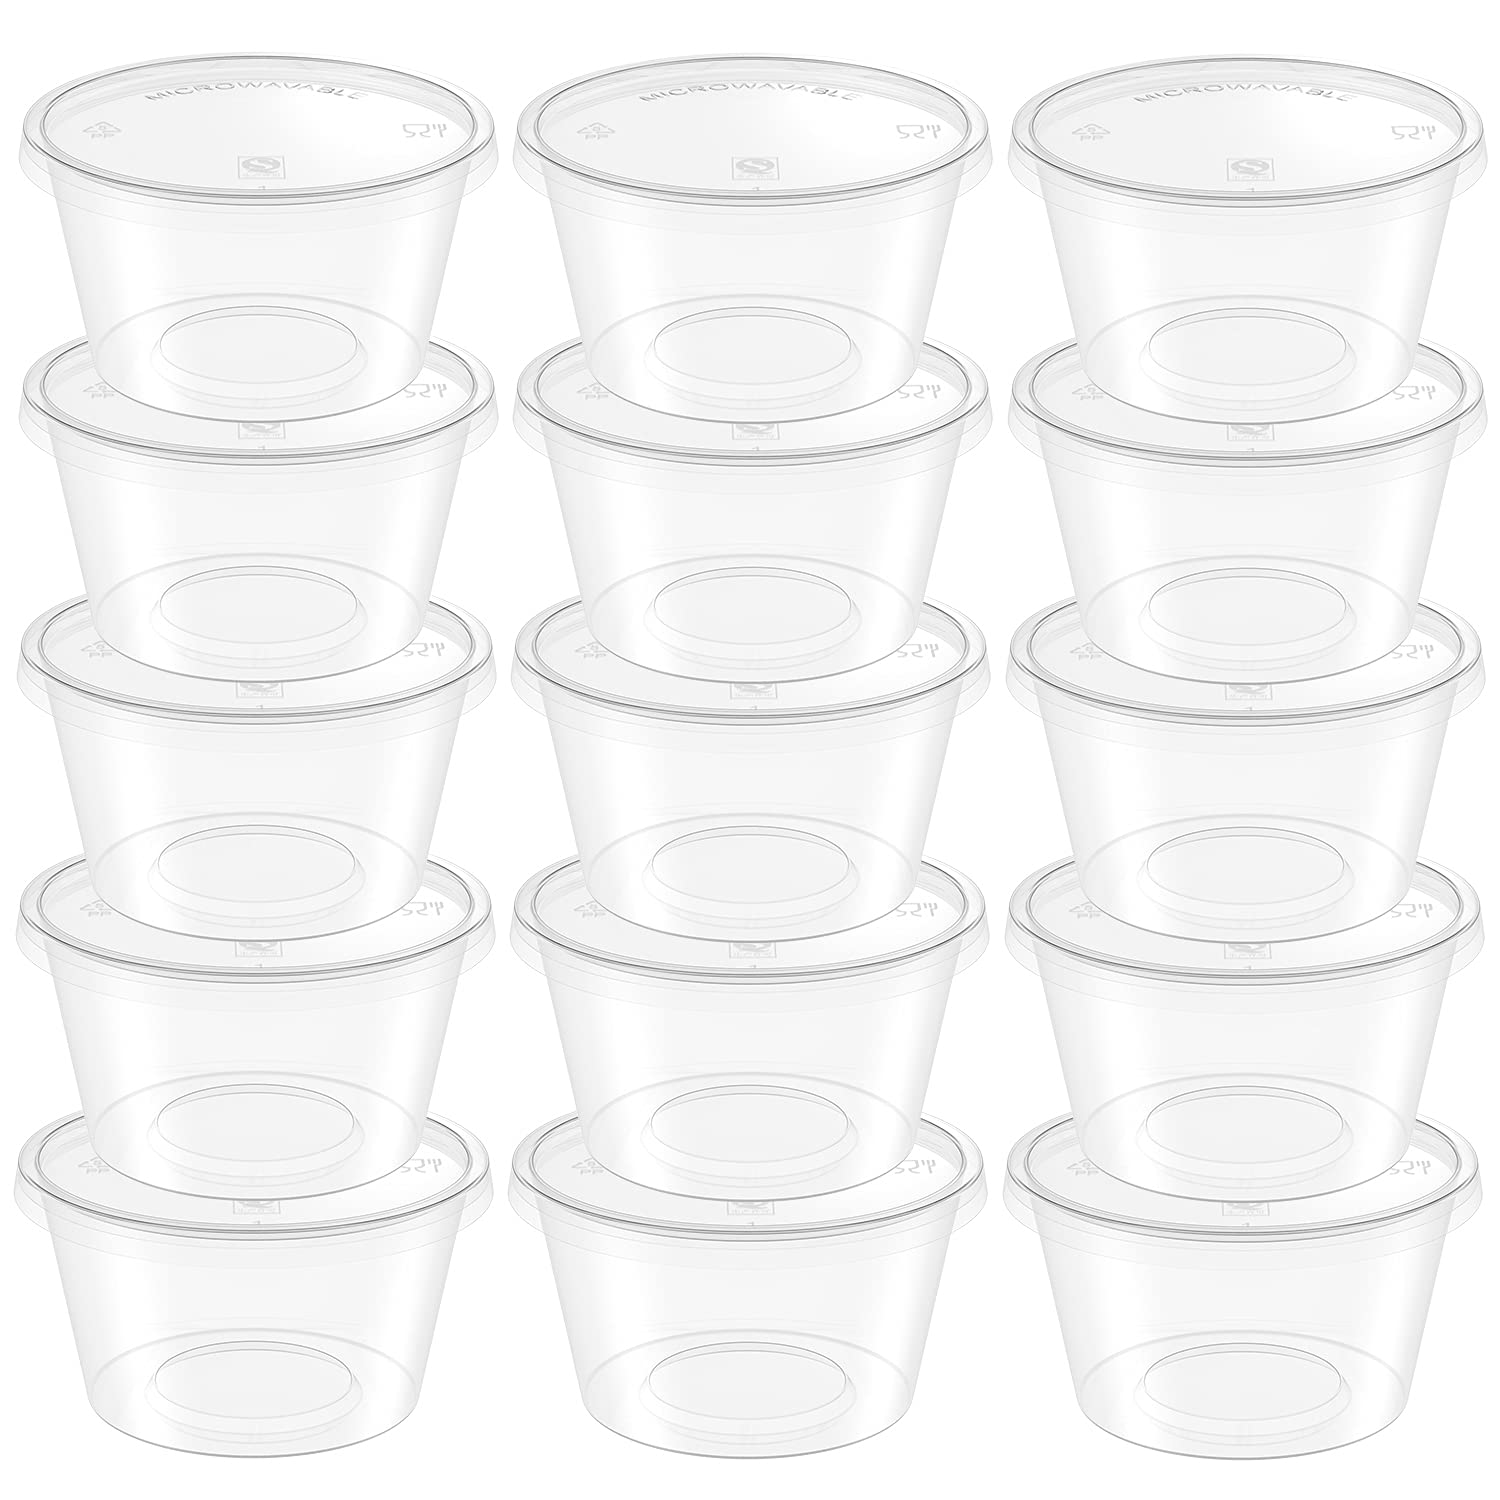 XINGLIAN 50 Pack 4 Ounce Clear Slime Foam Ball Storage Containers with Lids  for DIY Craft